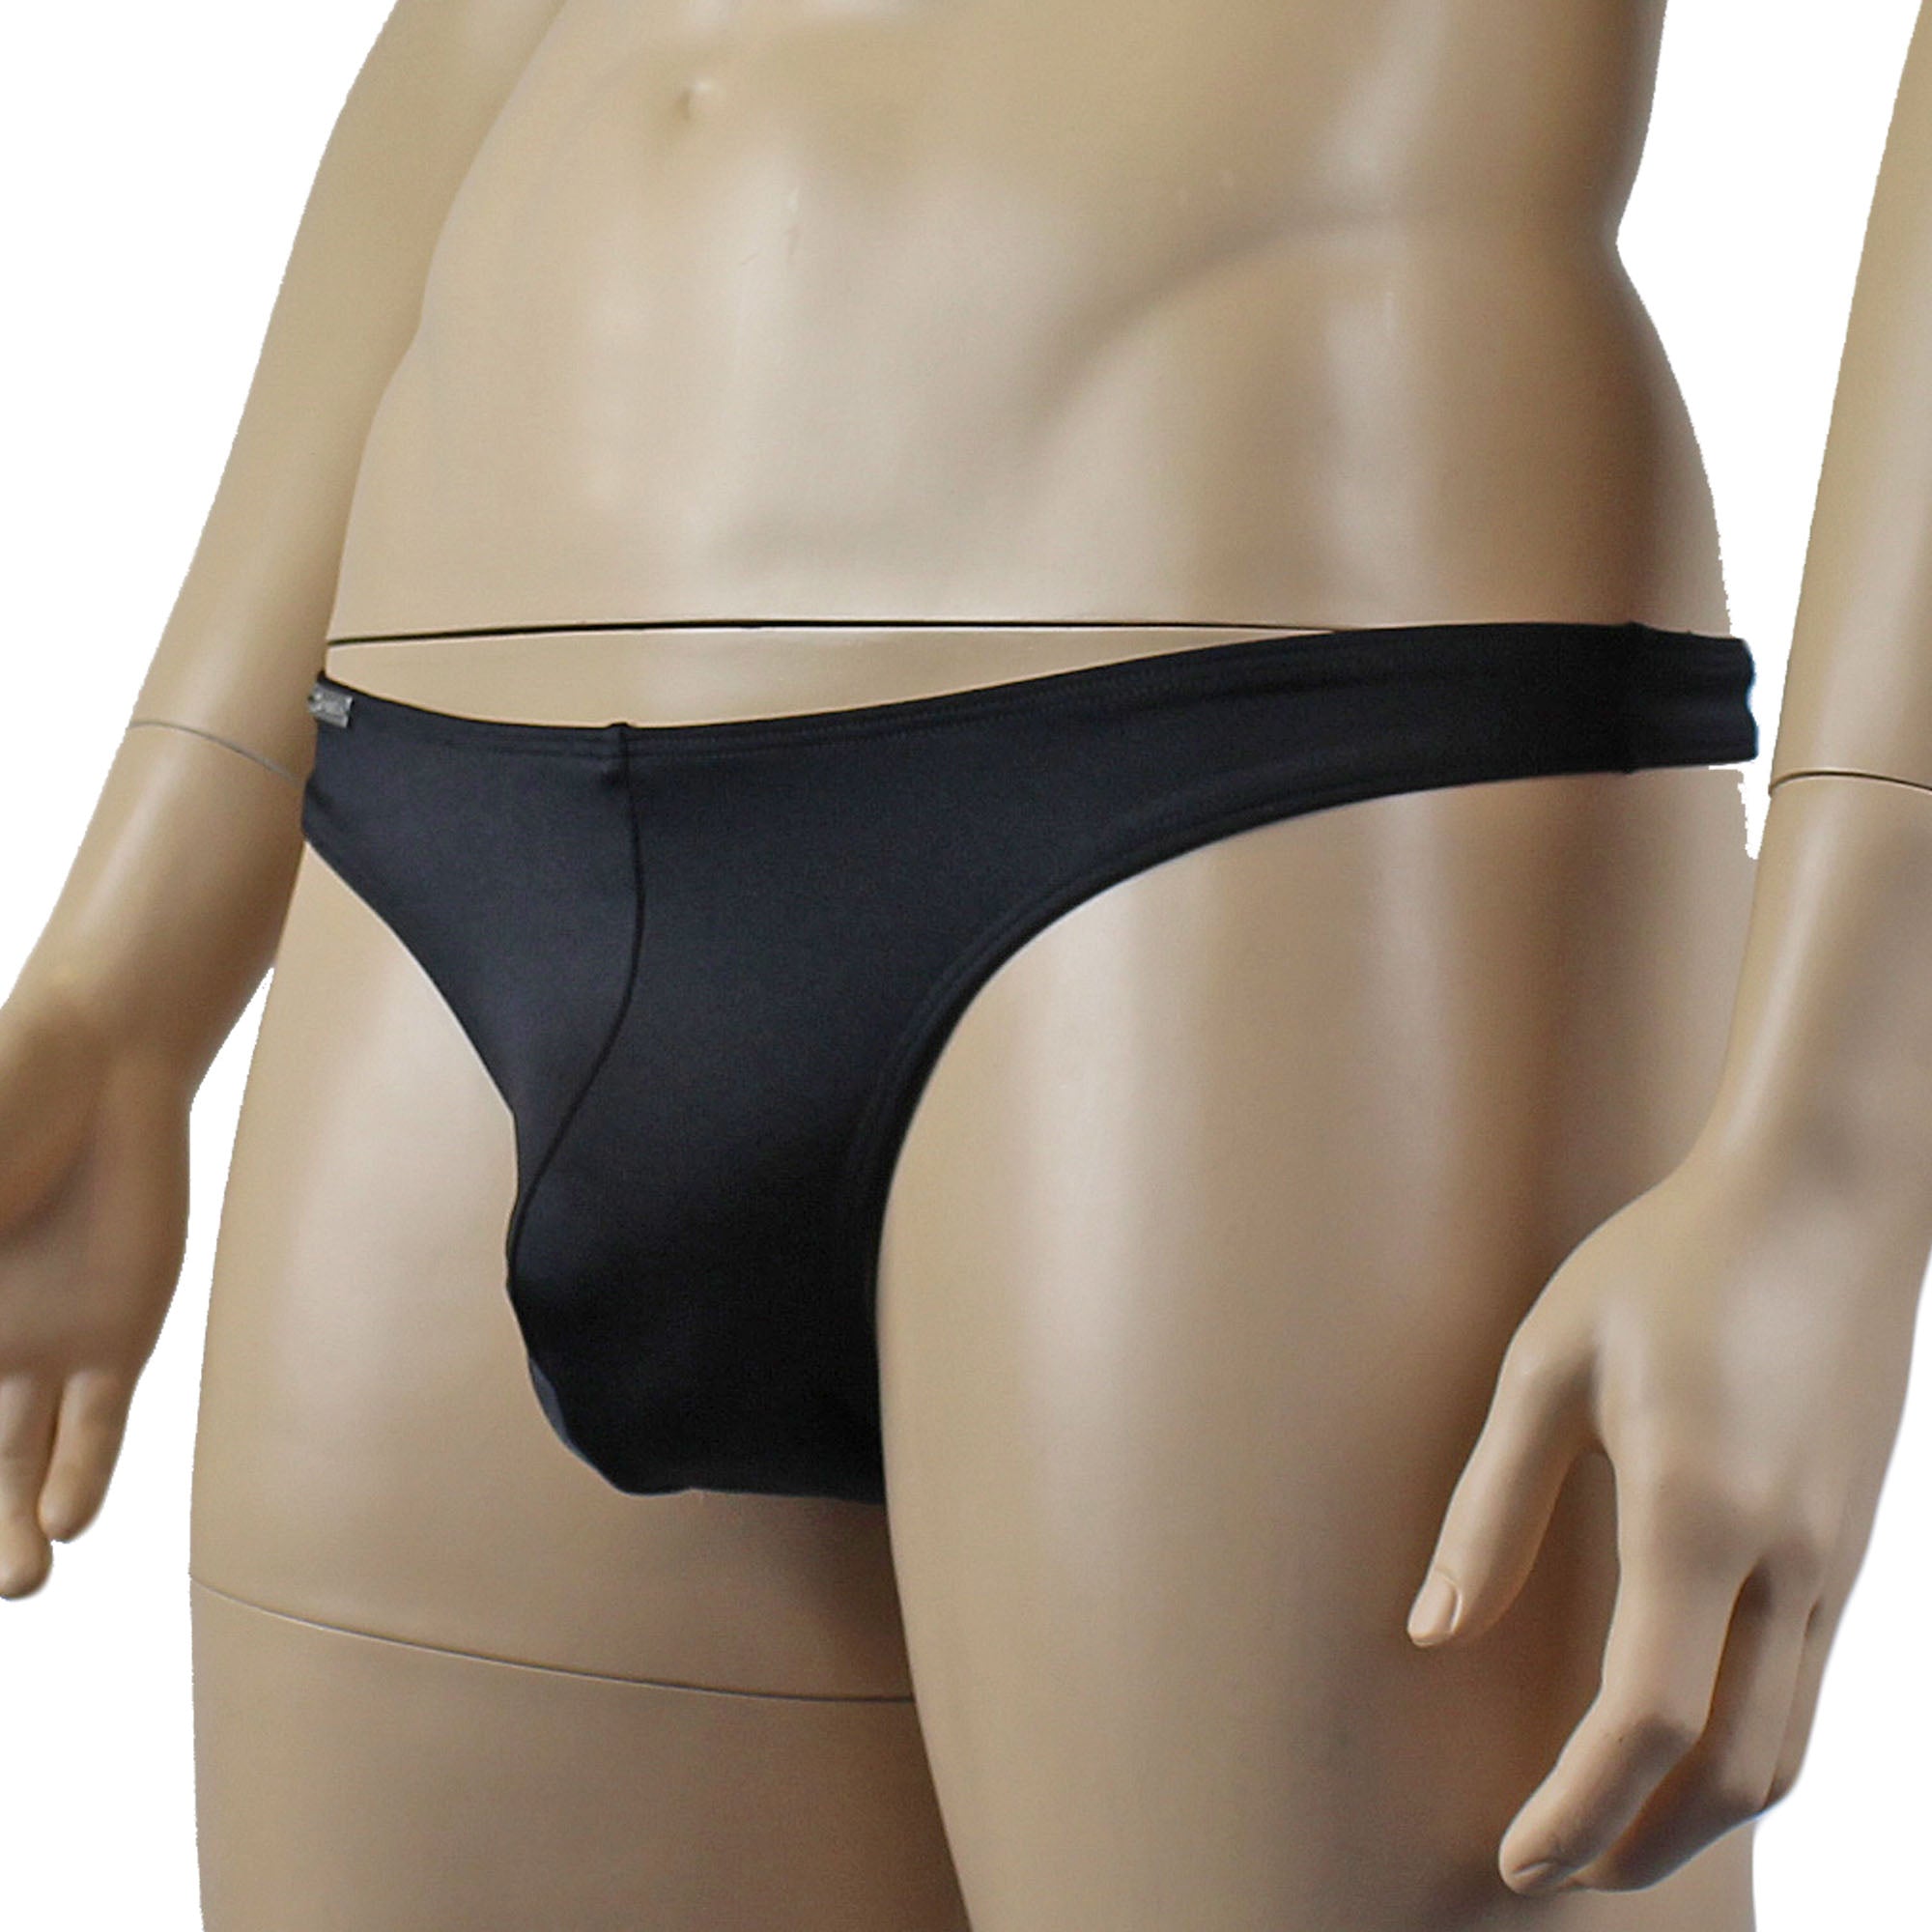 Mens Mick Thong with the Zoe, Detachable Garters & Stockings Black